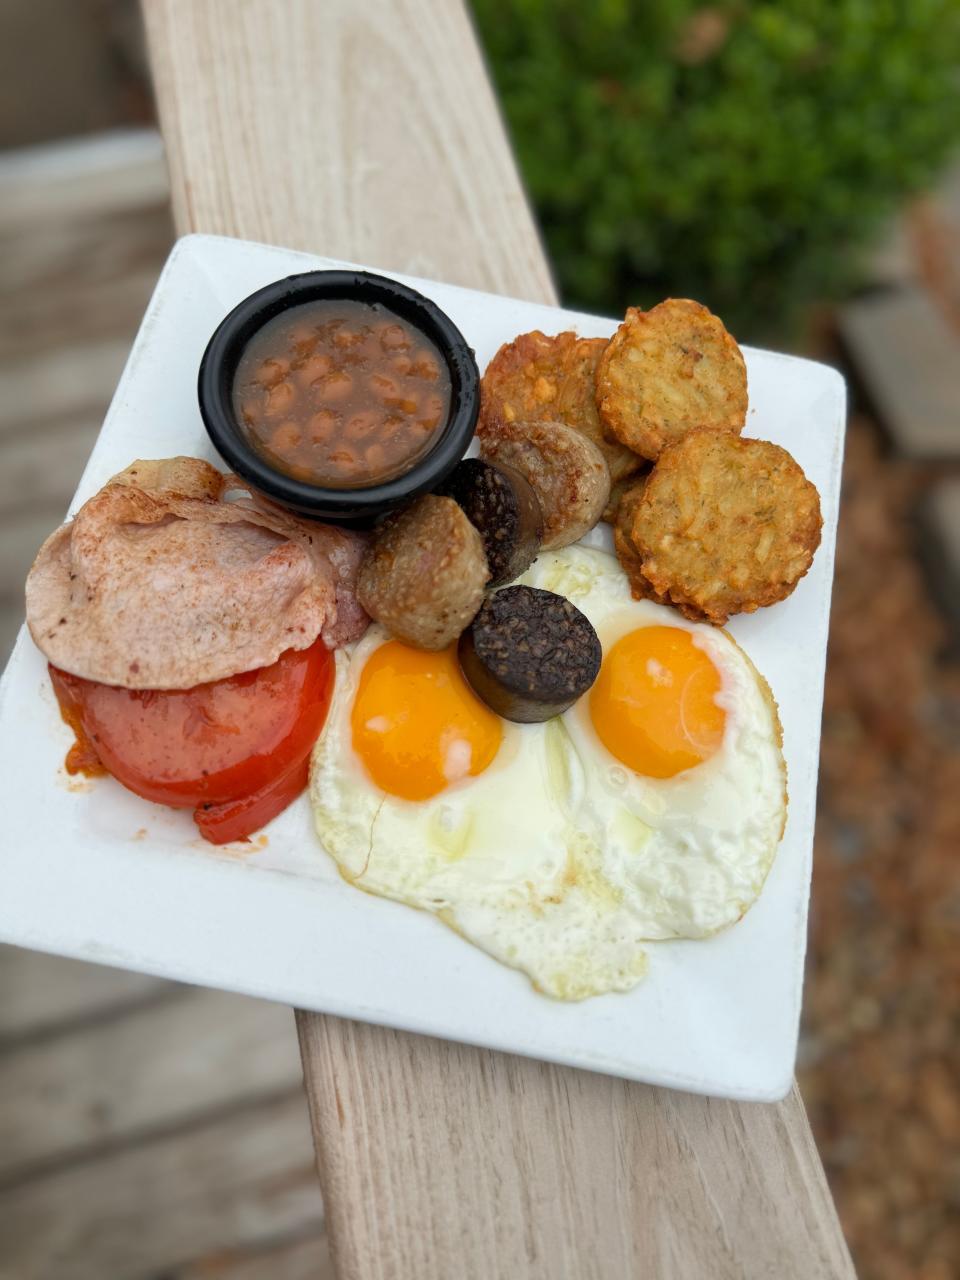 A sample of the brunch offered at Celtic Crossing this Easter.